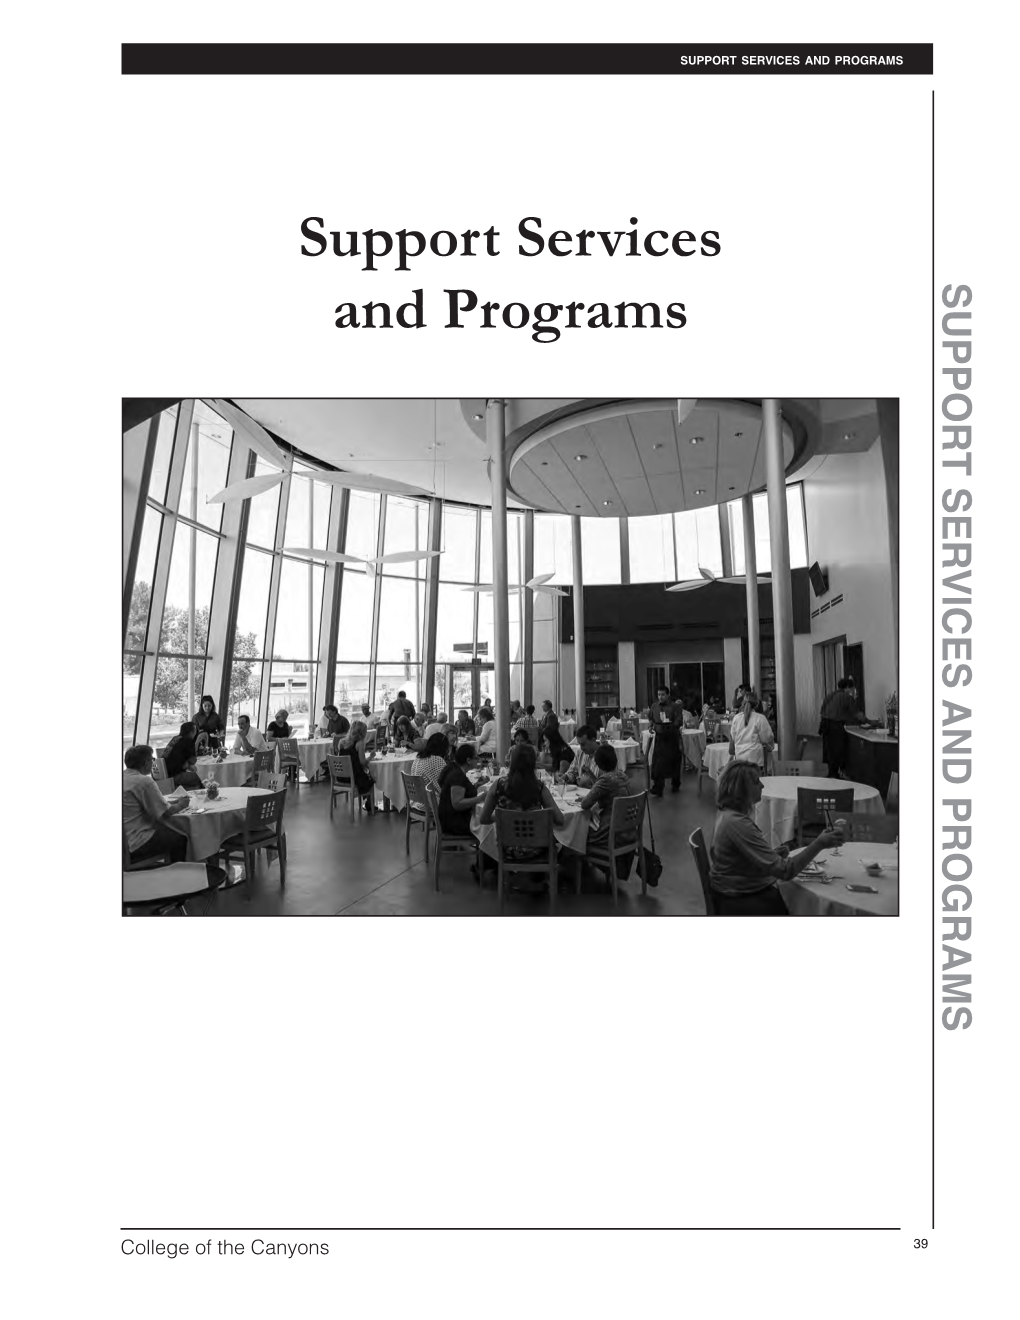 Support Services and Programs